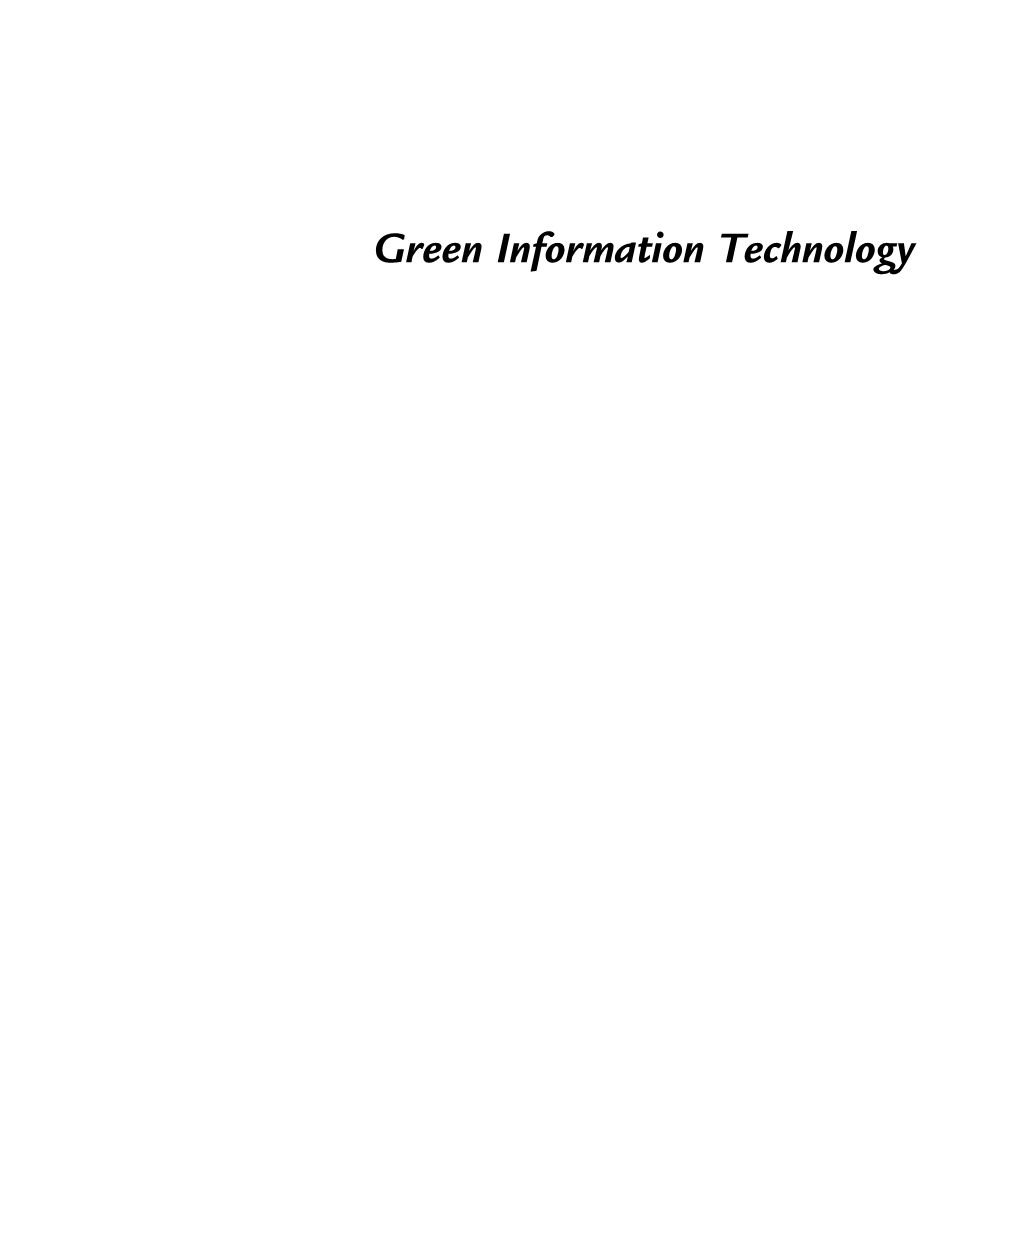 Green Information Technology Green Information Technology a Sustainable Approach